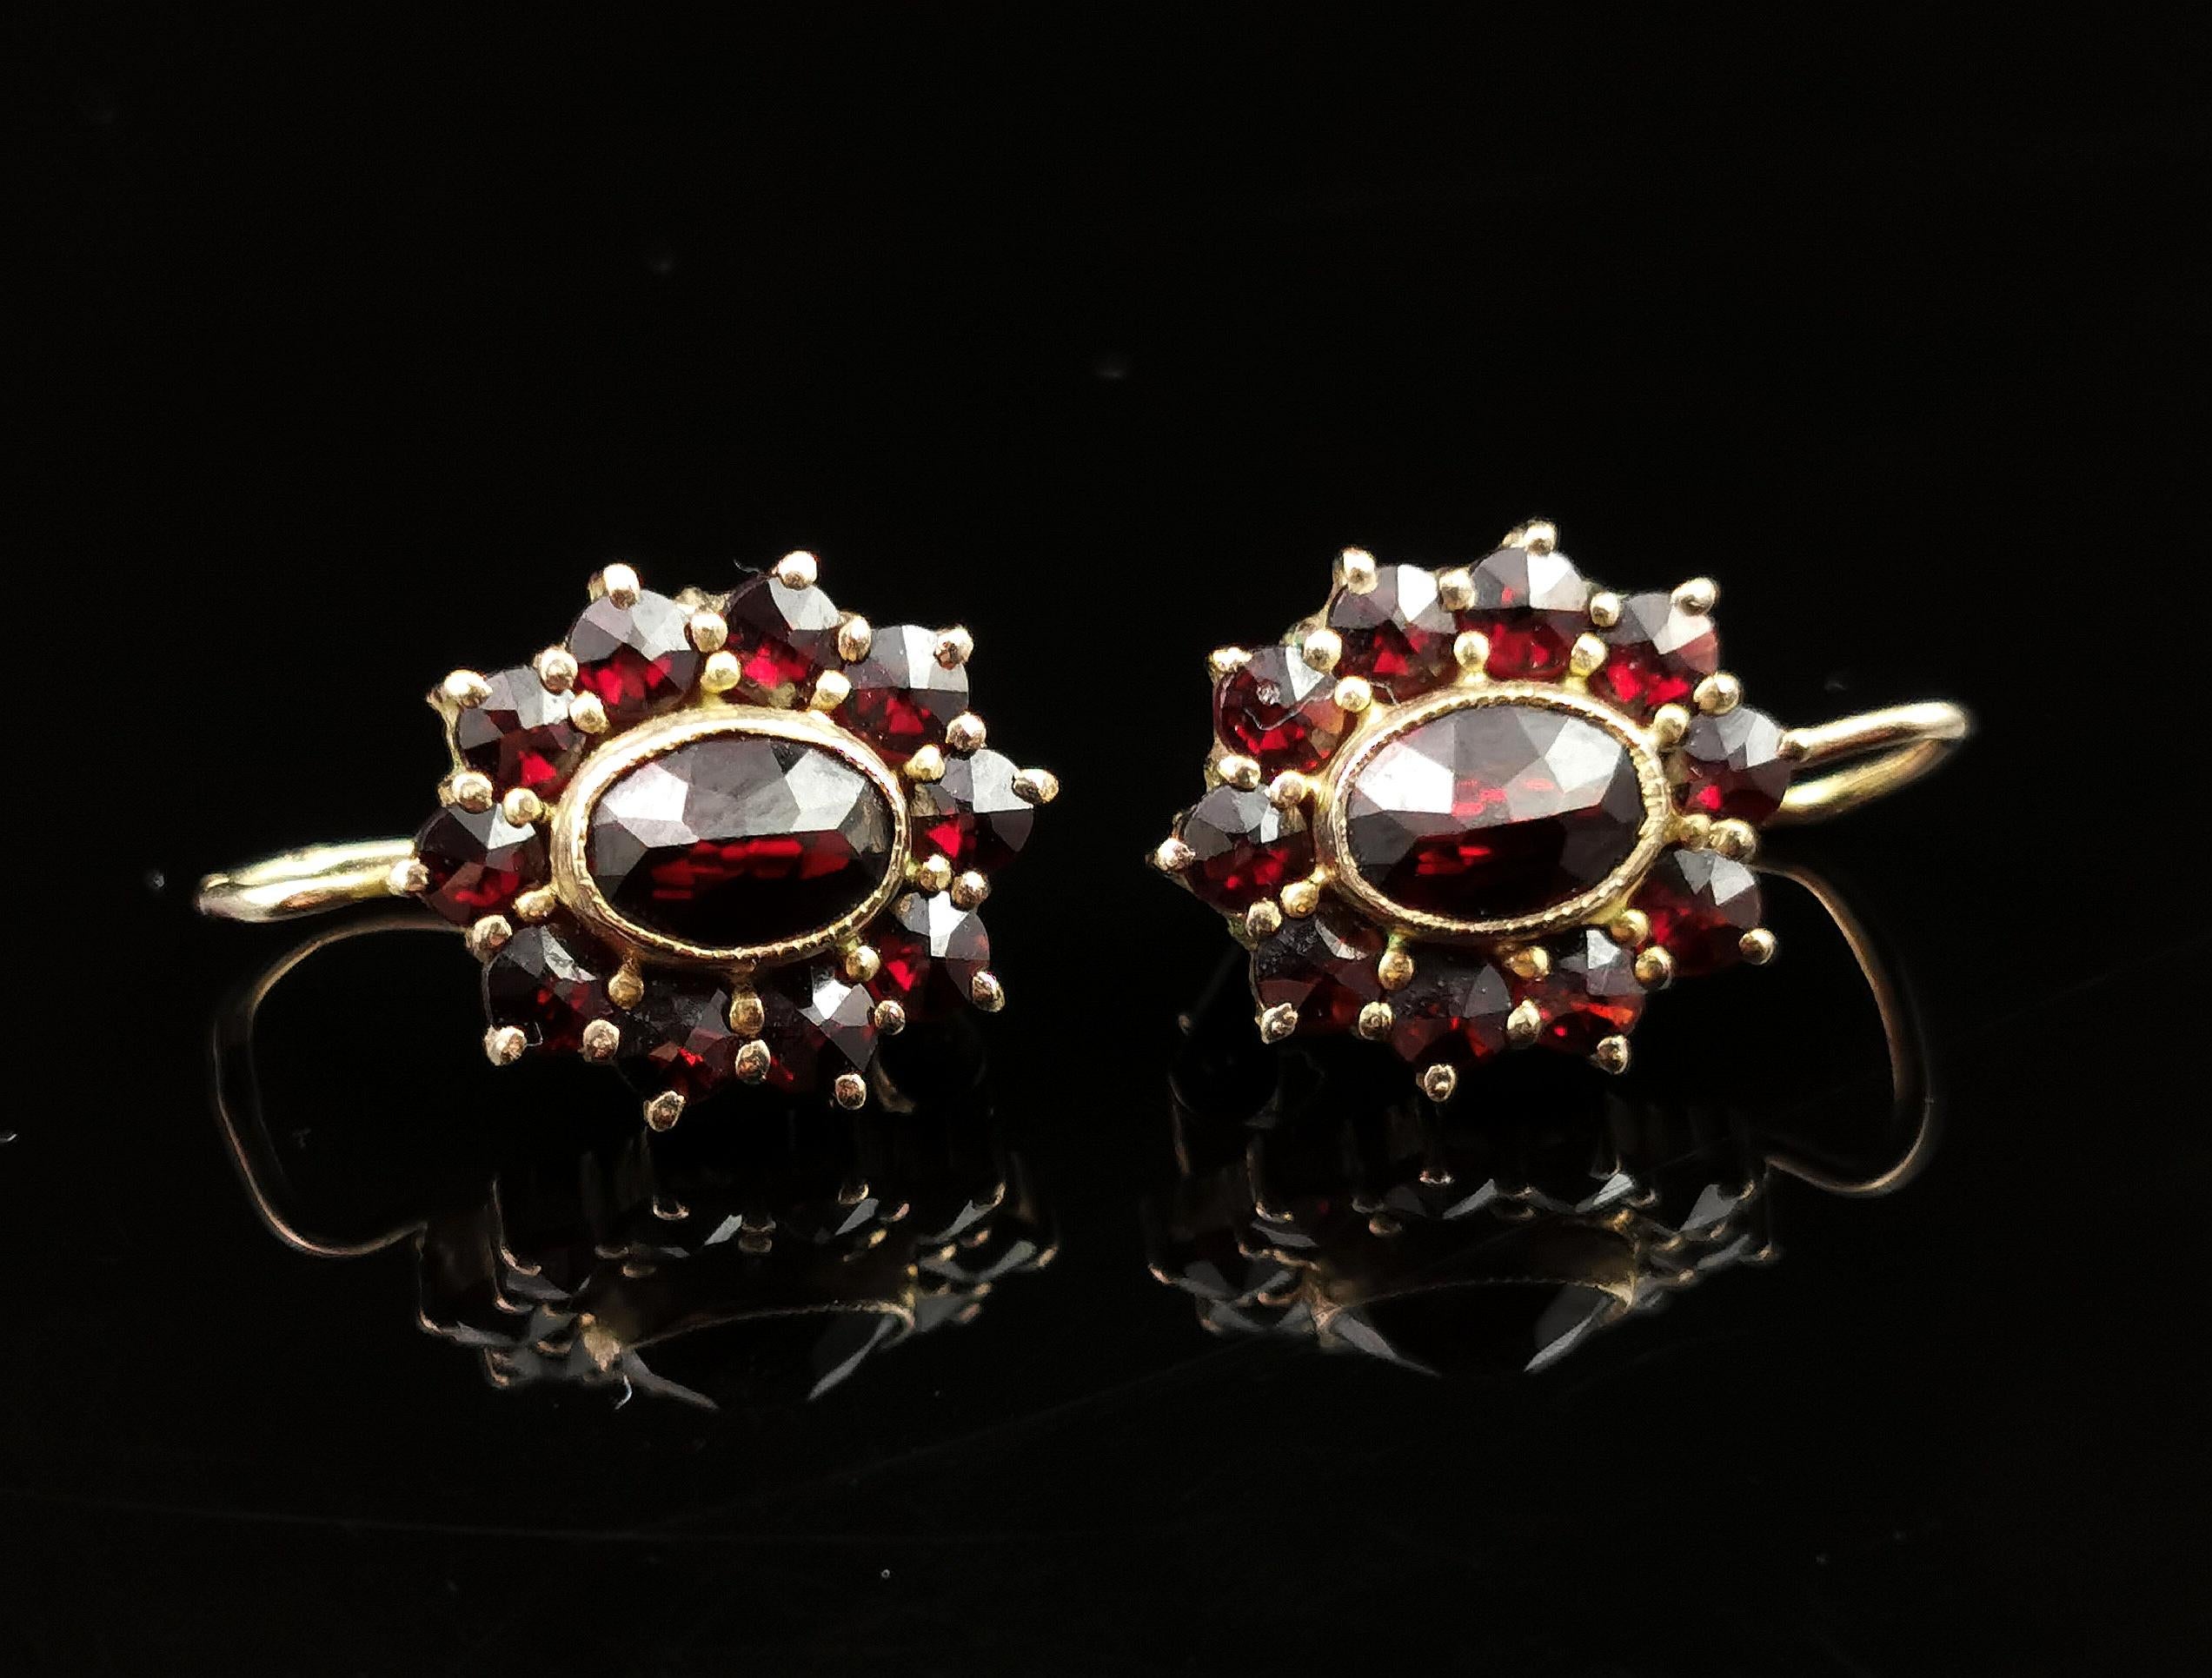 A gorgeous pair of vintage bohemian garnet cluster earrings

The rich red garnets compliment the golden metal beautifully and the faceted cut gives them just the right amount of sparkle.

There is a larger oval cut garnet bezel set to the centre